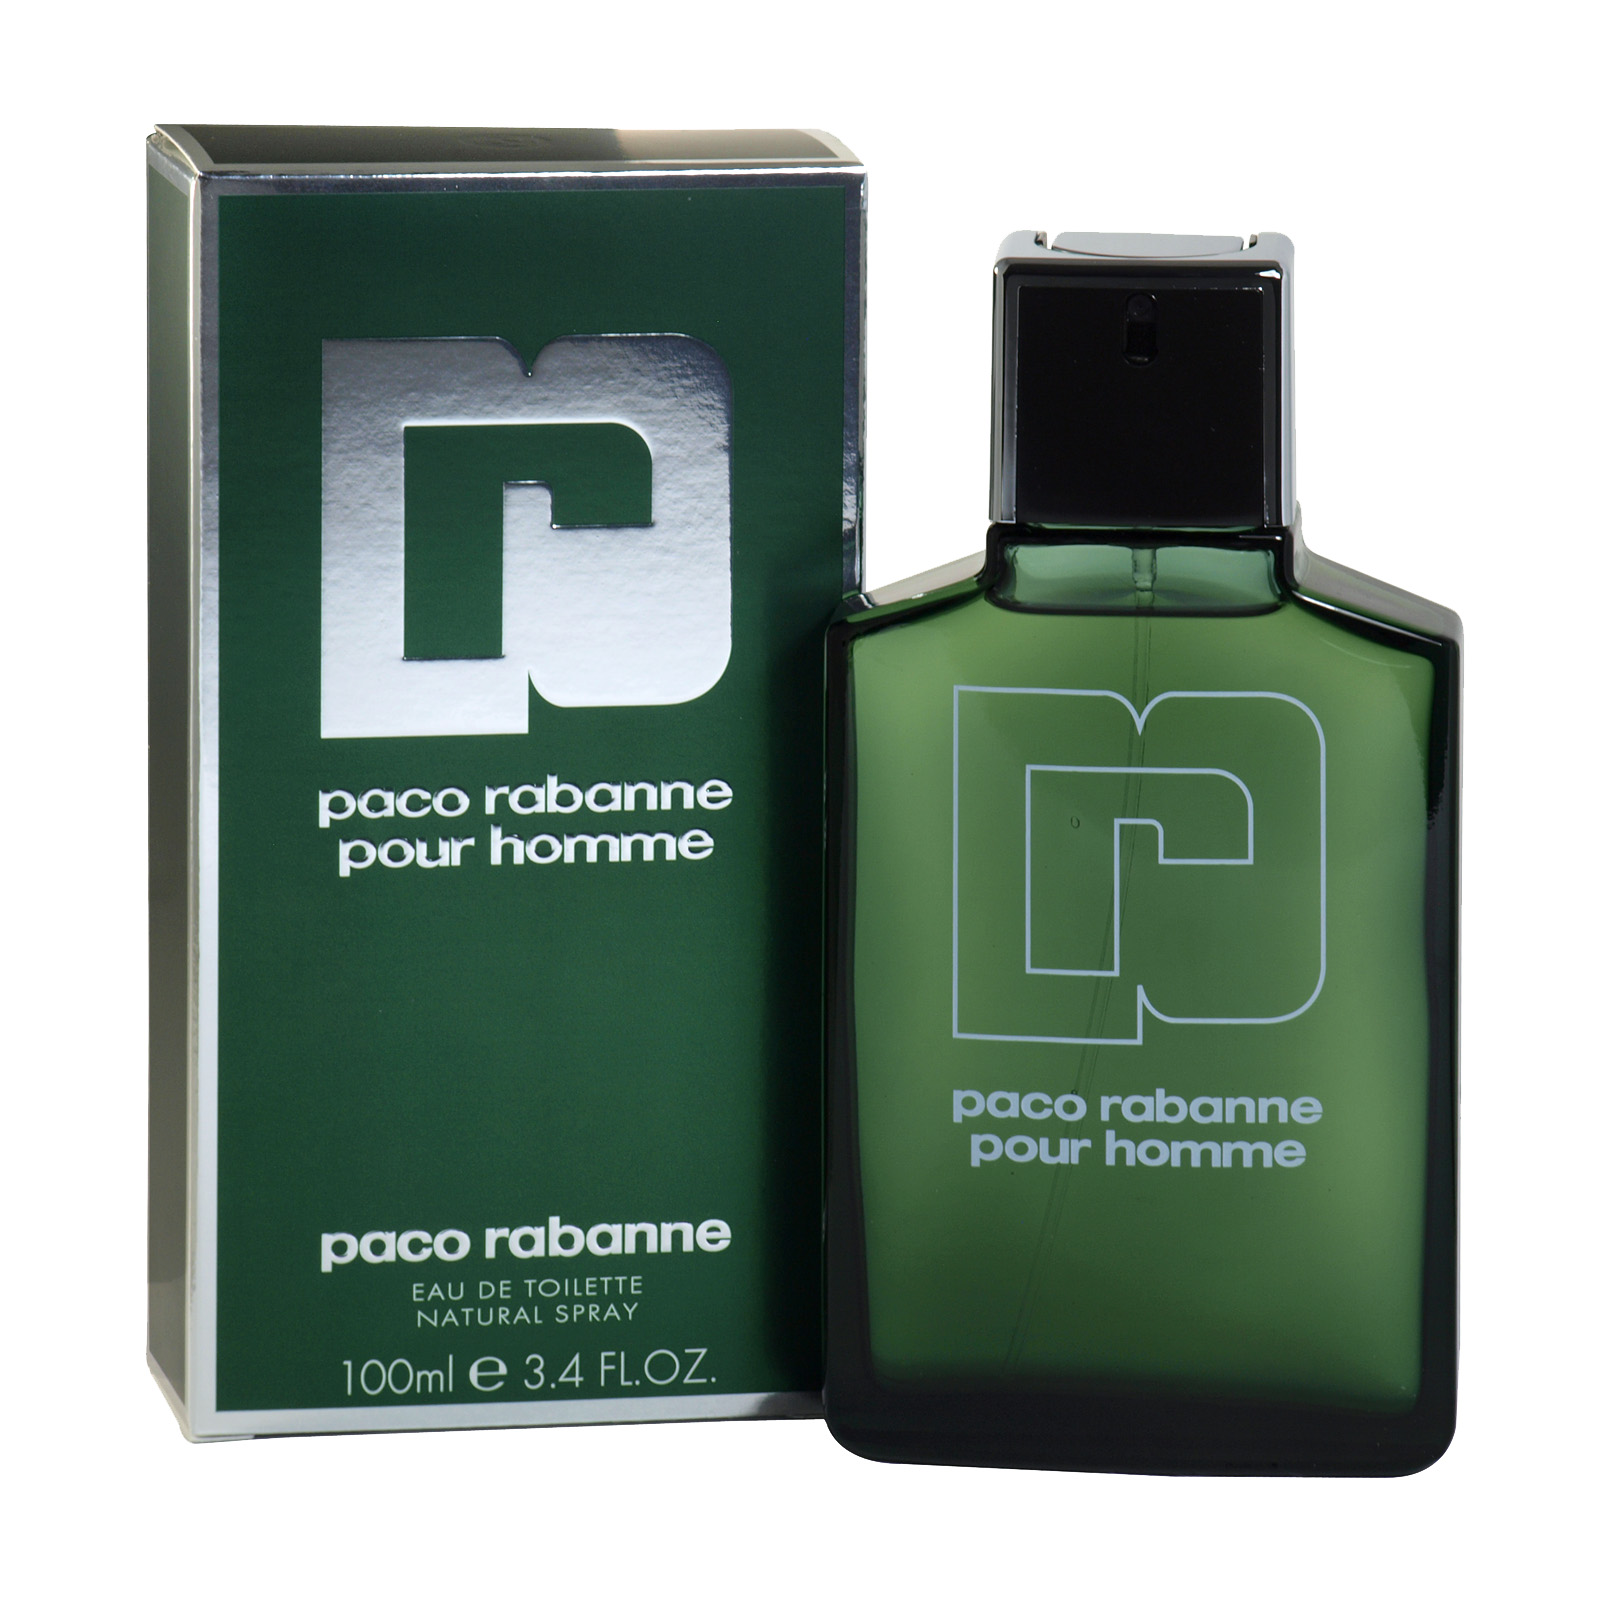 Paco pour homme. Paco Rabanne pour homme EDT. Paco Rabanne pour homme 100 мл. Paco Rabanne XS pour homme туалетная вода 100мл. Paco Rabanne pour homme туалетная вода 100 мл. Тестер.